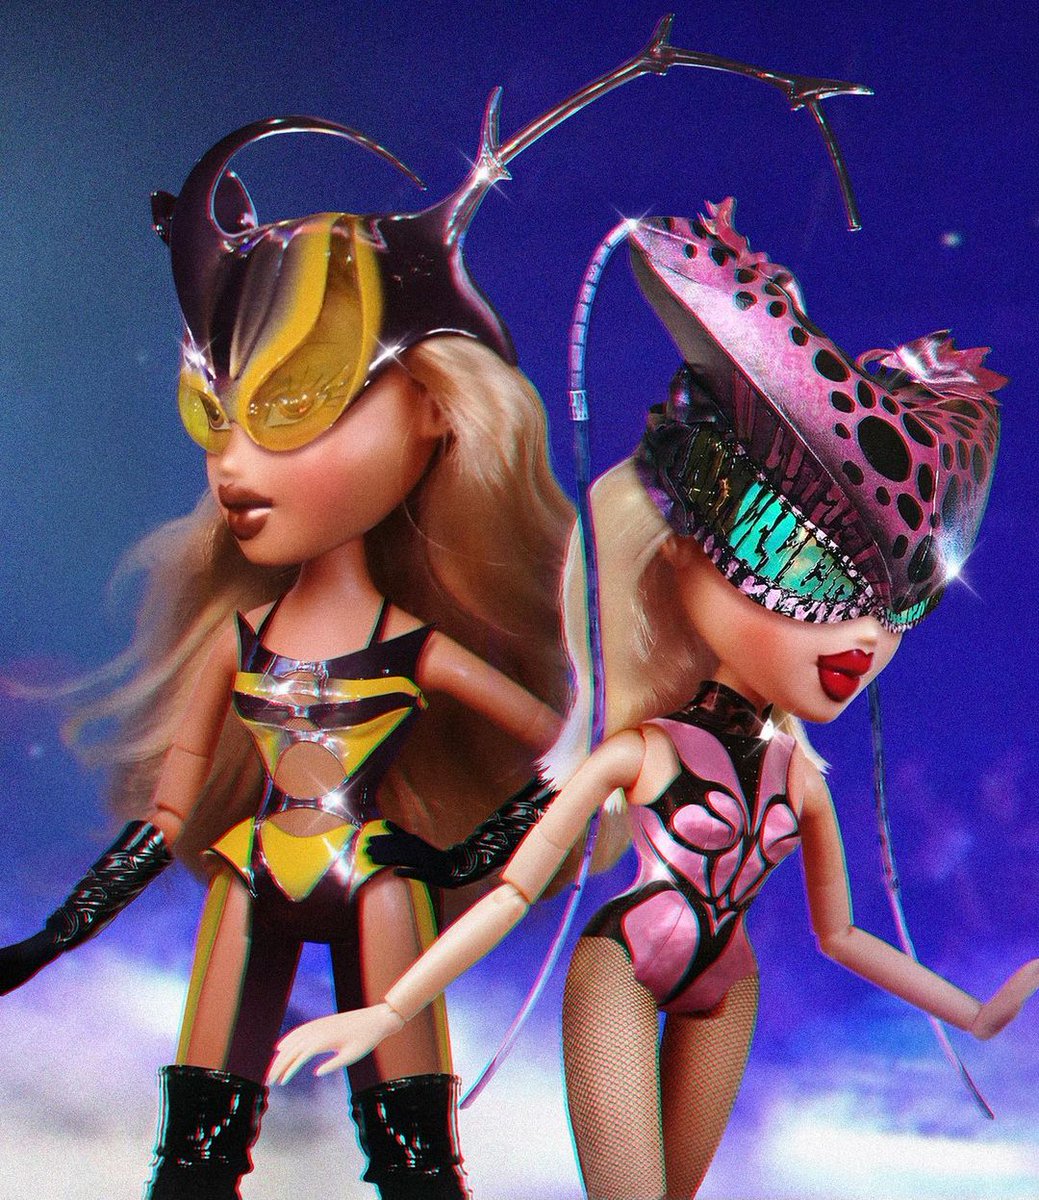 Bratz recreates Lady Gaga and Beyonce’s insect costumes from their most recent stadium tours! 🐝🪲